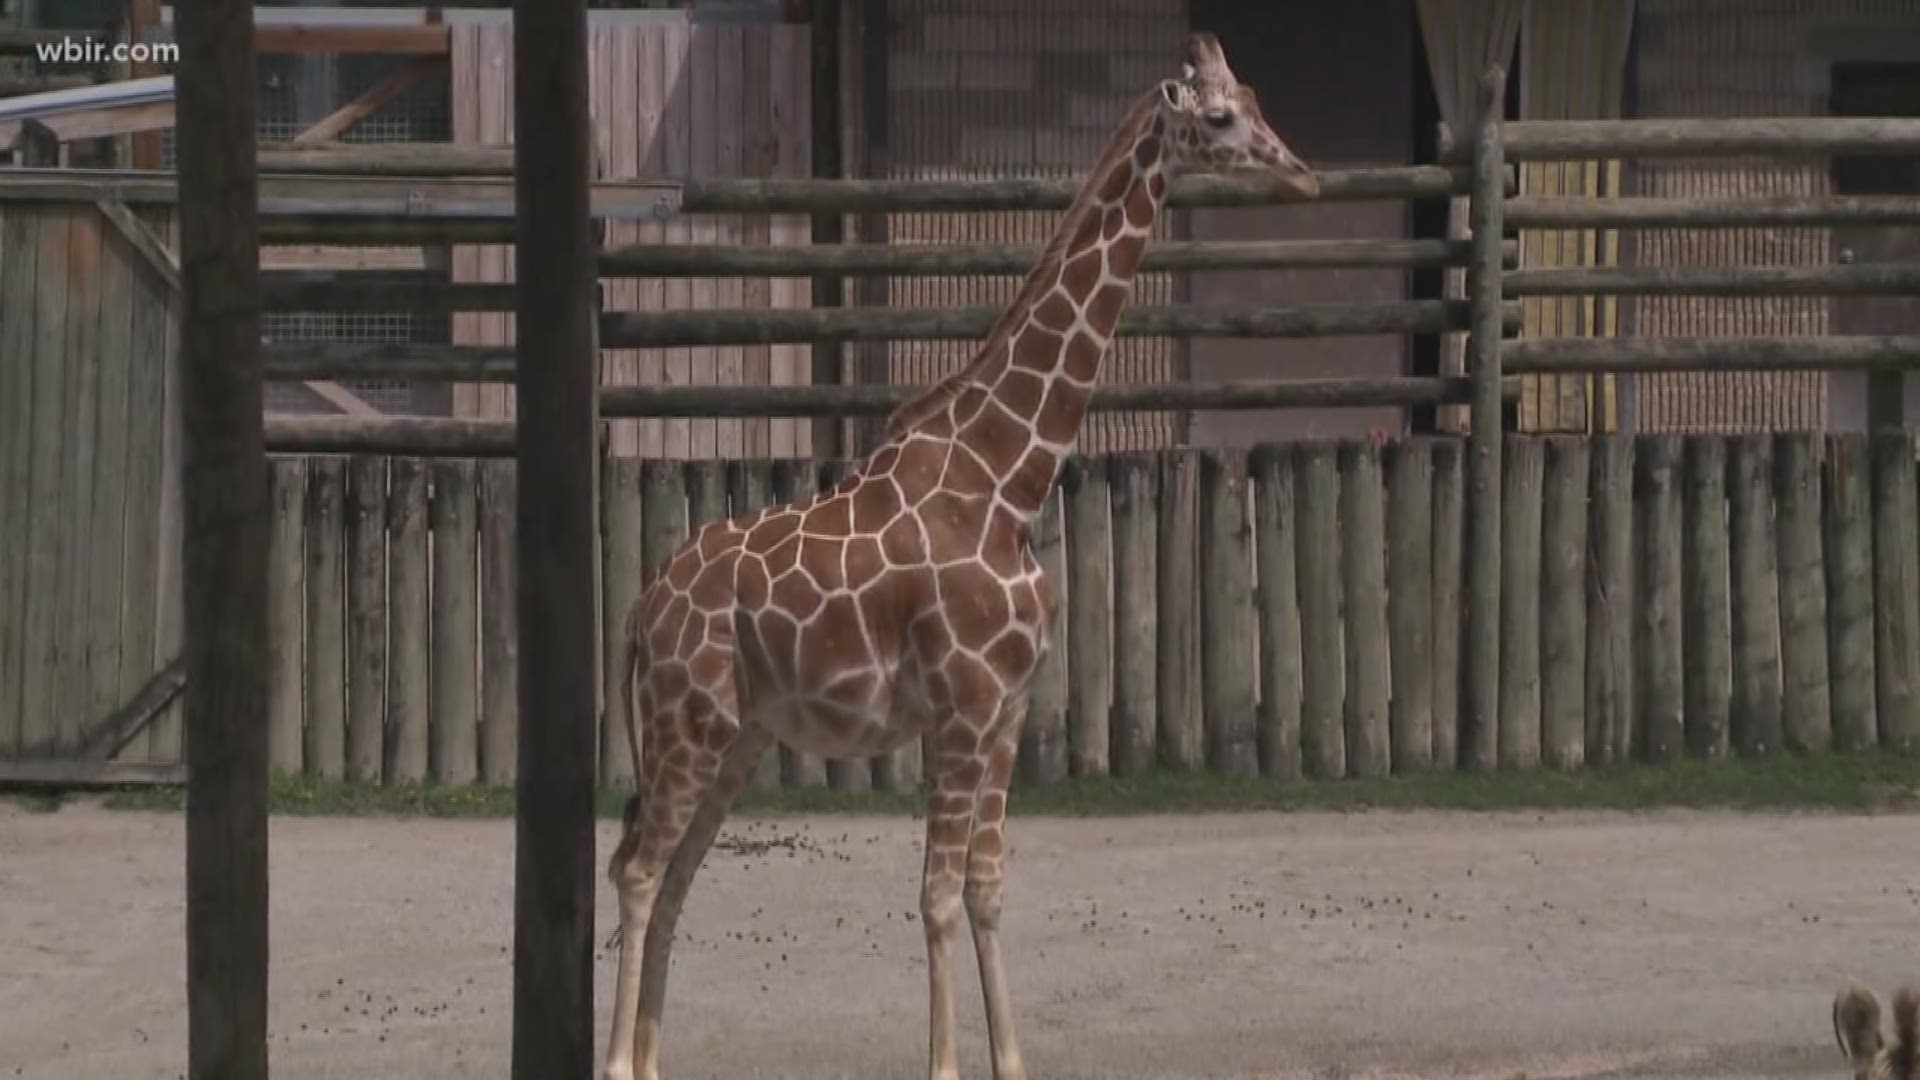 Zoo Knoxville announces that Frances, their 3-year-old Giraffe is expecting a calf sometime in the next few weeks.
The father is Jumbe, who Frances was brought in to pair with on recommendation of the Species Survival plan. Visit zooknoxville.org to learn more about the Giraffes.
June 21, 2019-4pm